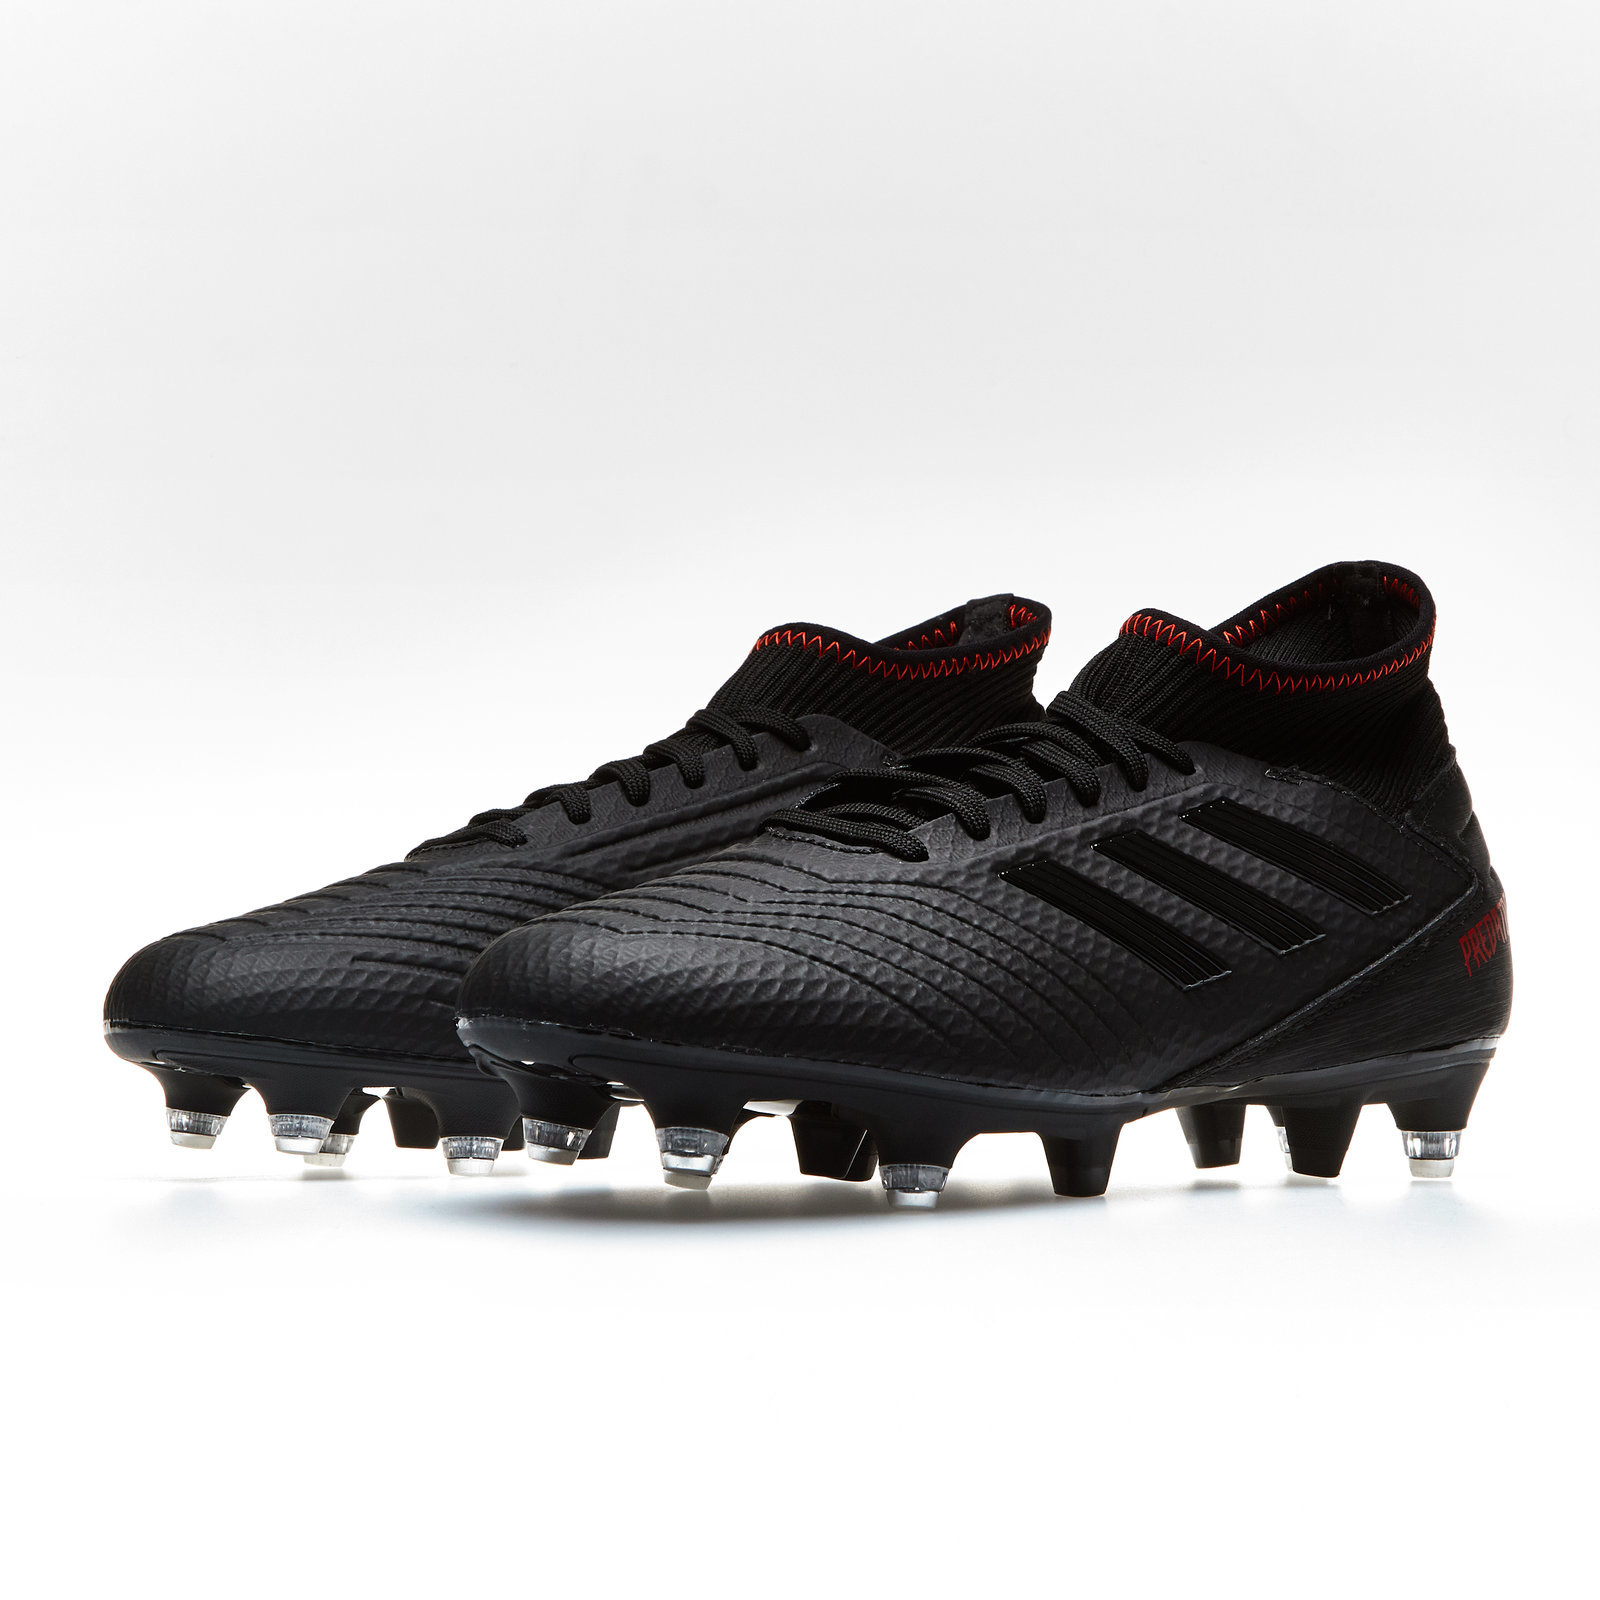 adidas football boots with metal studs